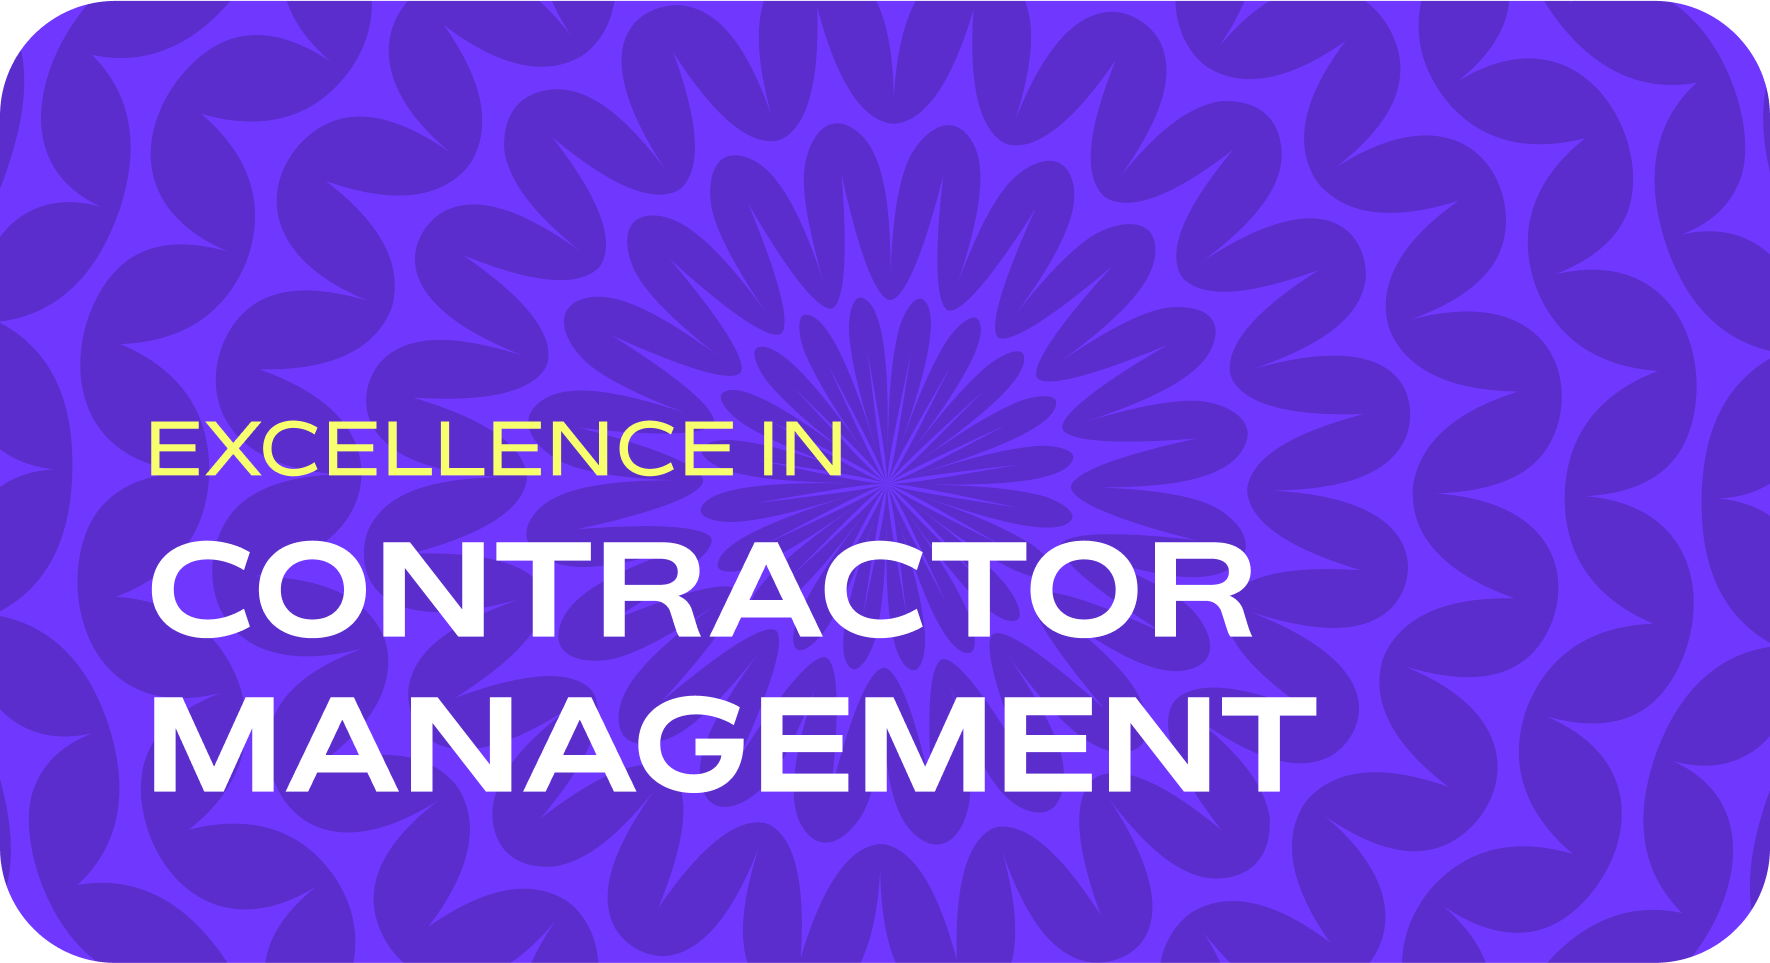 Excellence in contractor management.